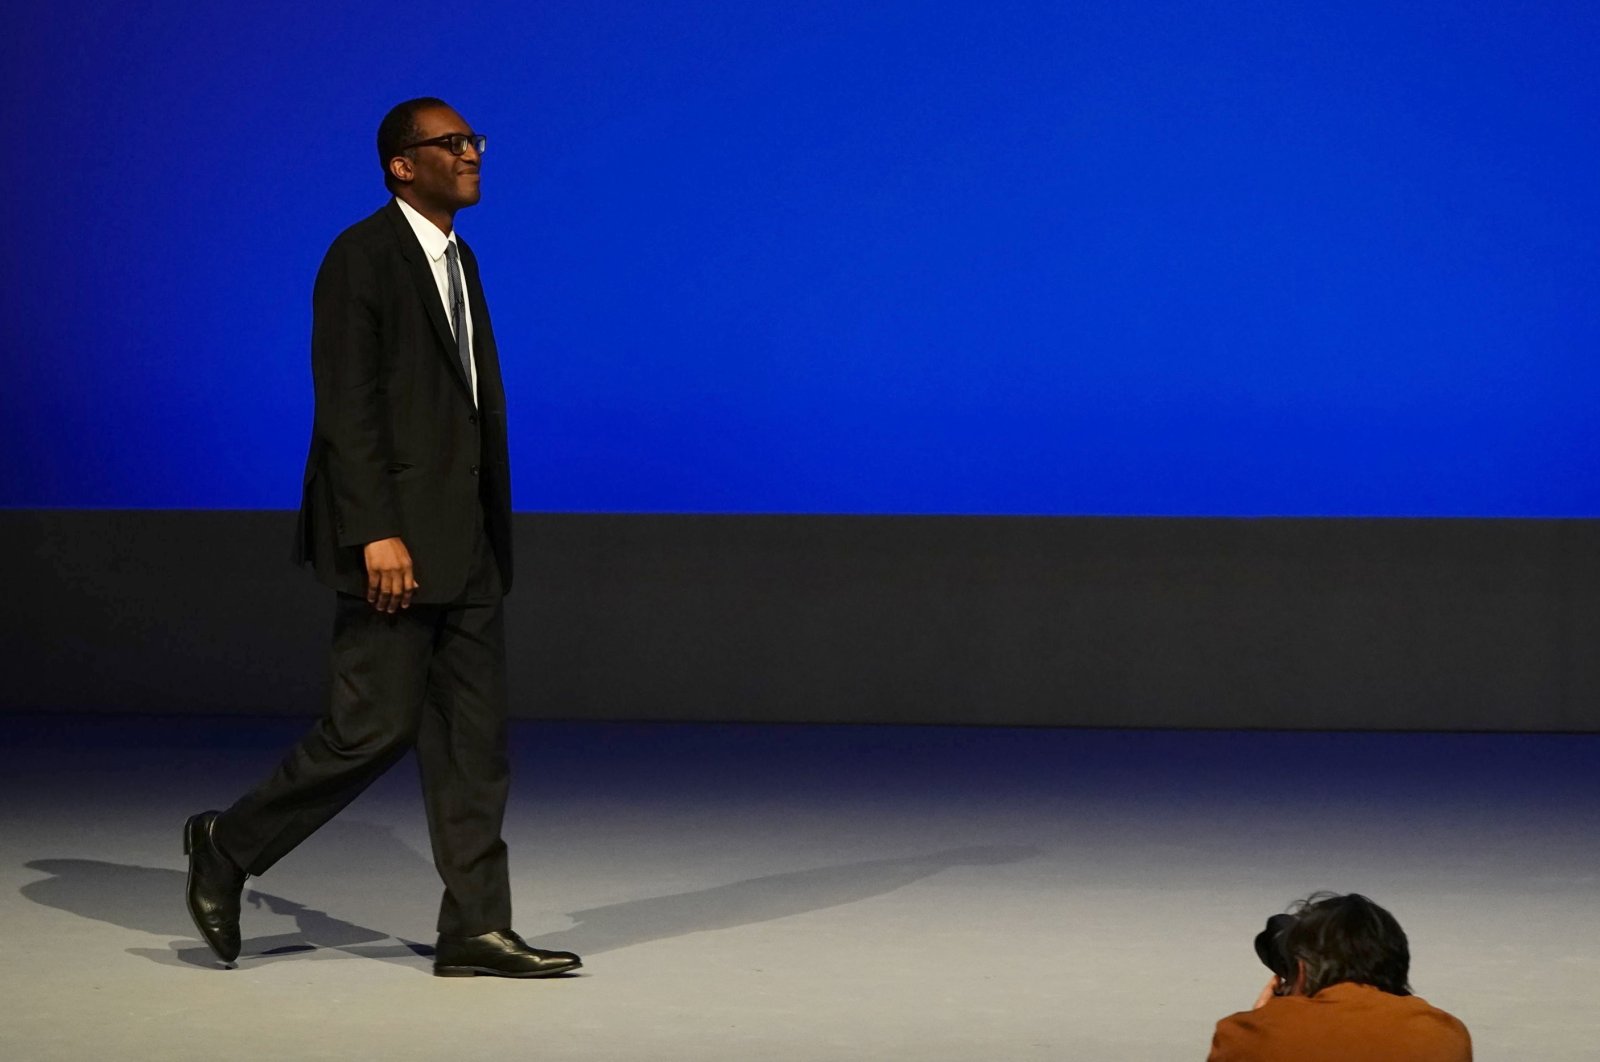 British Chancellor of the Exchequer Kwasi Kwarteng arrives to deliver his speech at the Conservative Party annual conference at the International Convention Centre in Birmingham, the U.K., Oct. 3, 2022. (AP Photo)